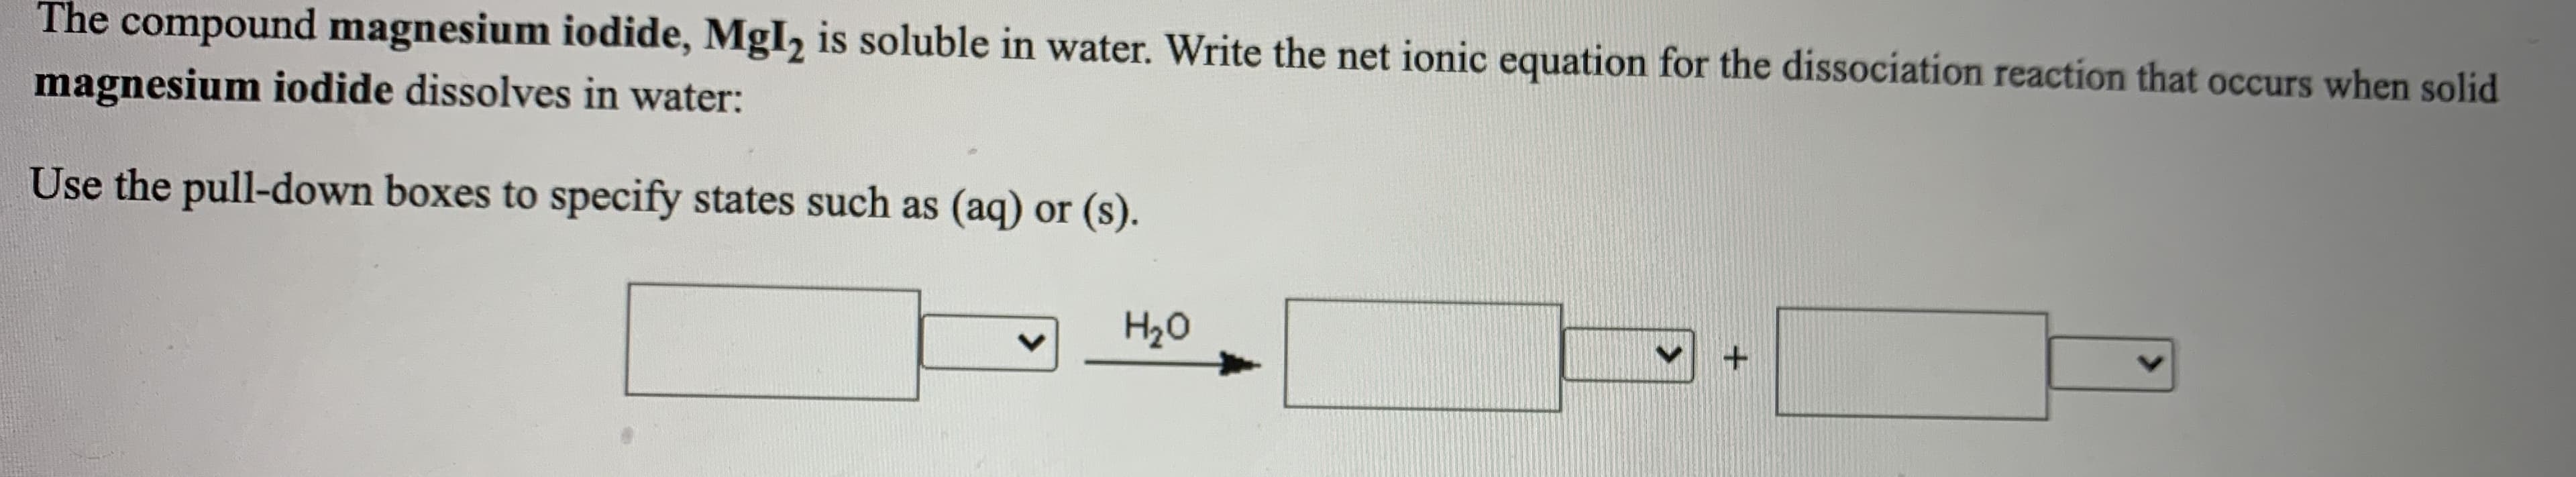 The compound magnesium iodide, MgI2 is soluble in water. Write the net ionic equation for the dissociation reaction that occurs when solid
magnesium iodide dissolves in water:
Use the pull-down boxes to specify states such as (aq) or (s).
H20
